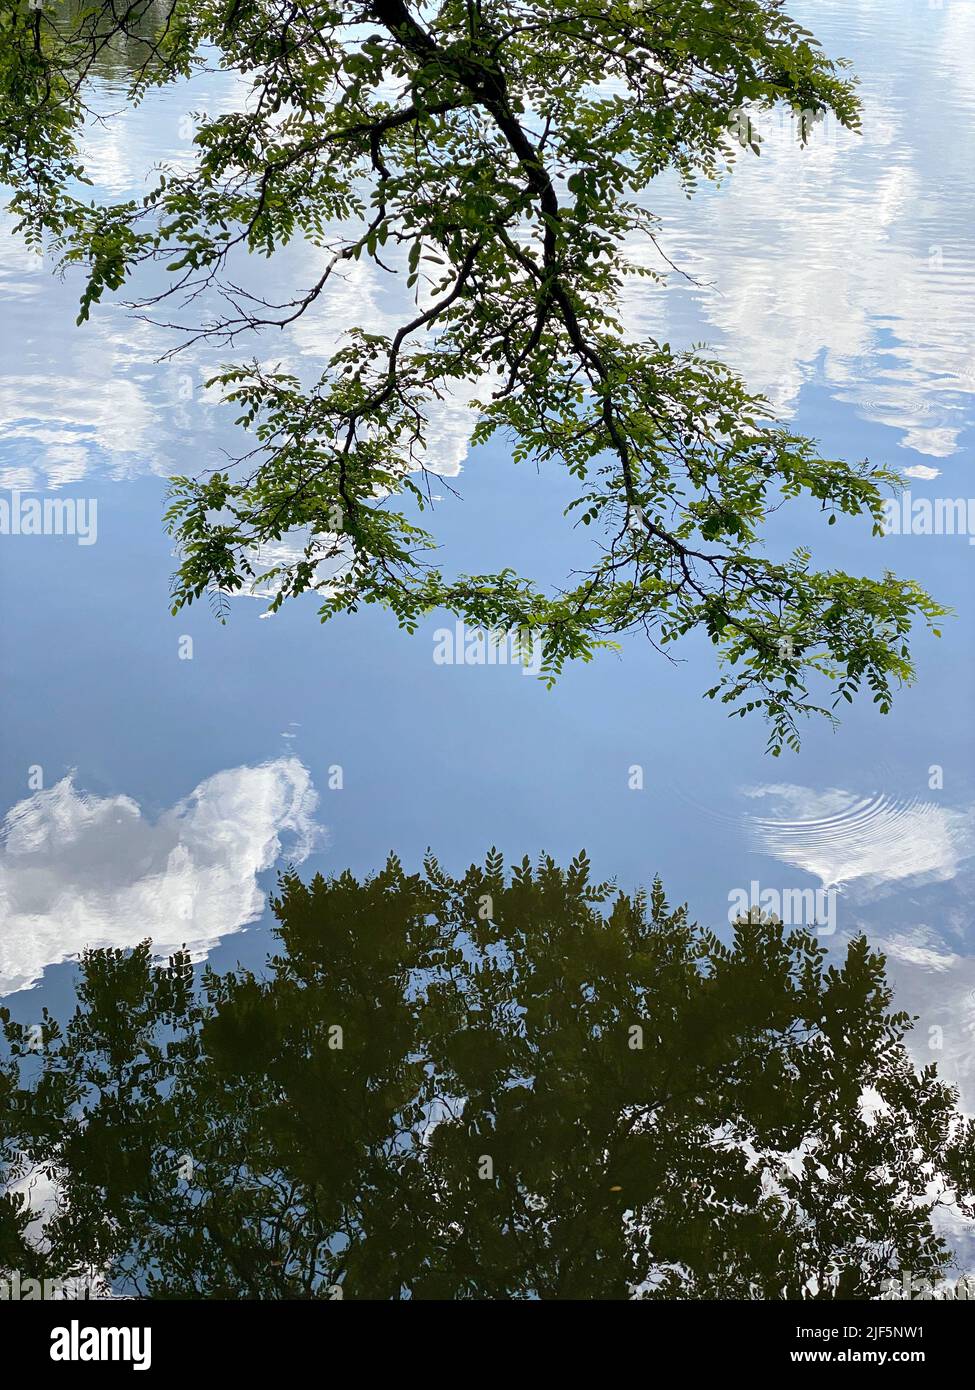 hanging tree branches are reflected on rippled water surface Stock Photo